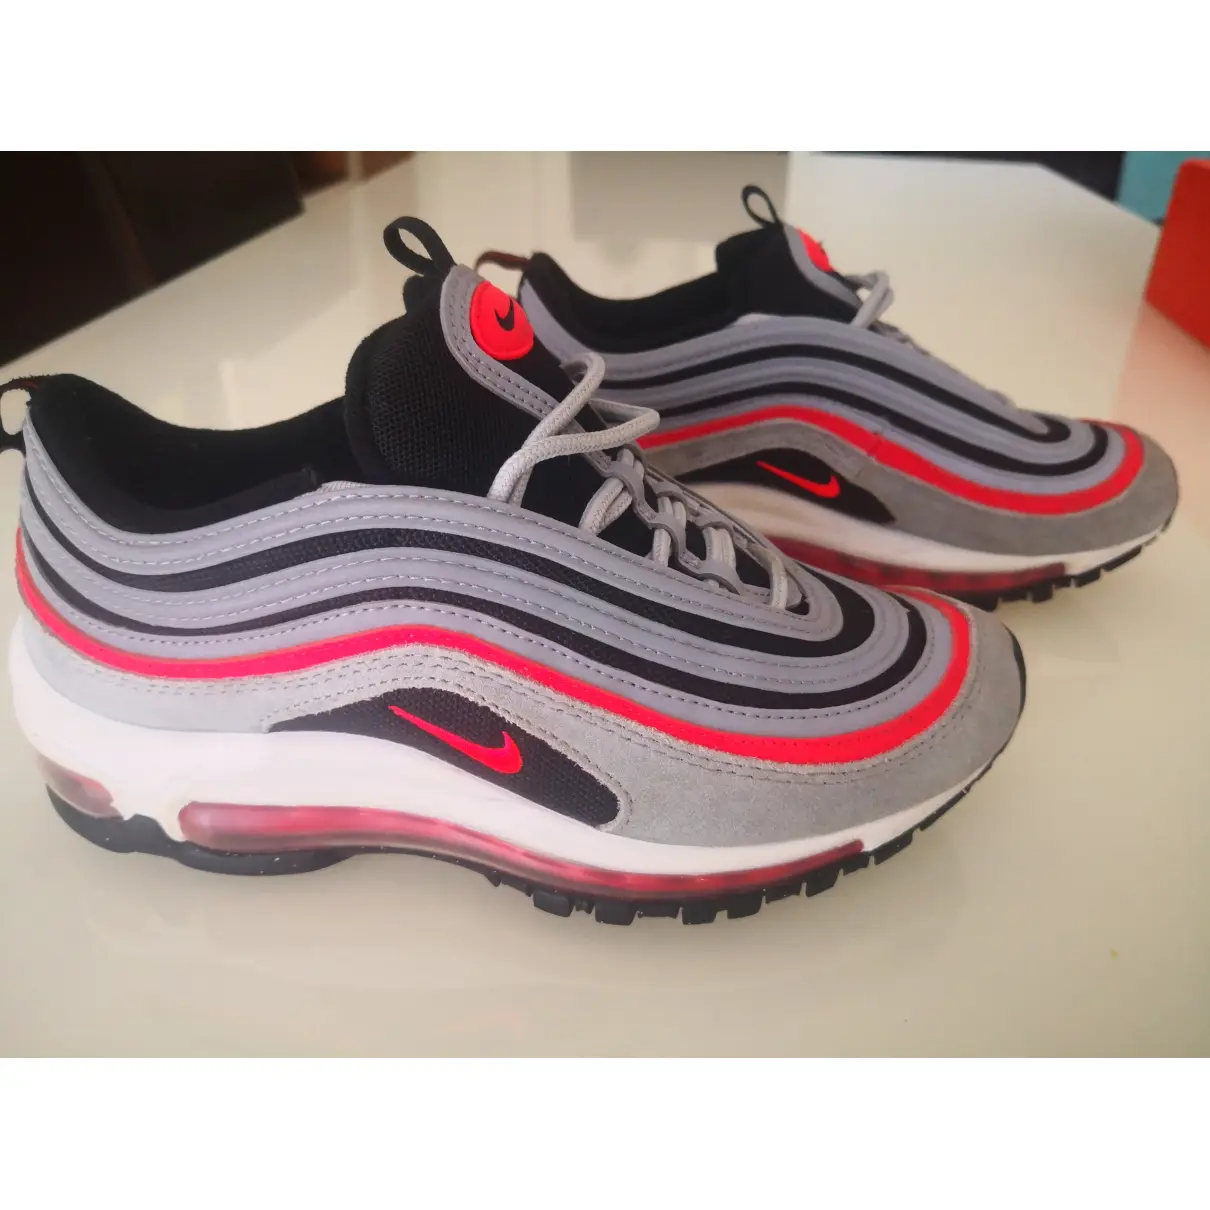 Buy Nike Air Max 97 trainers online